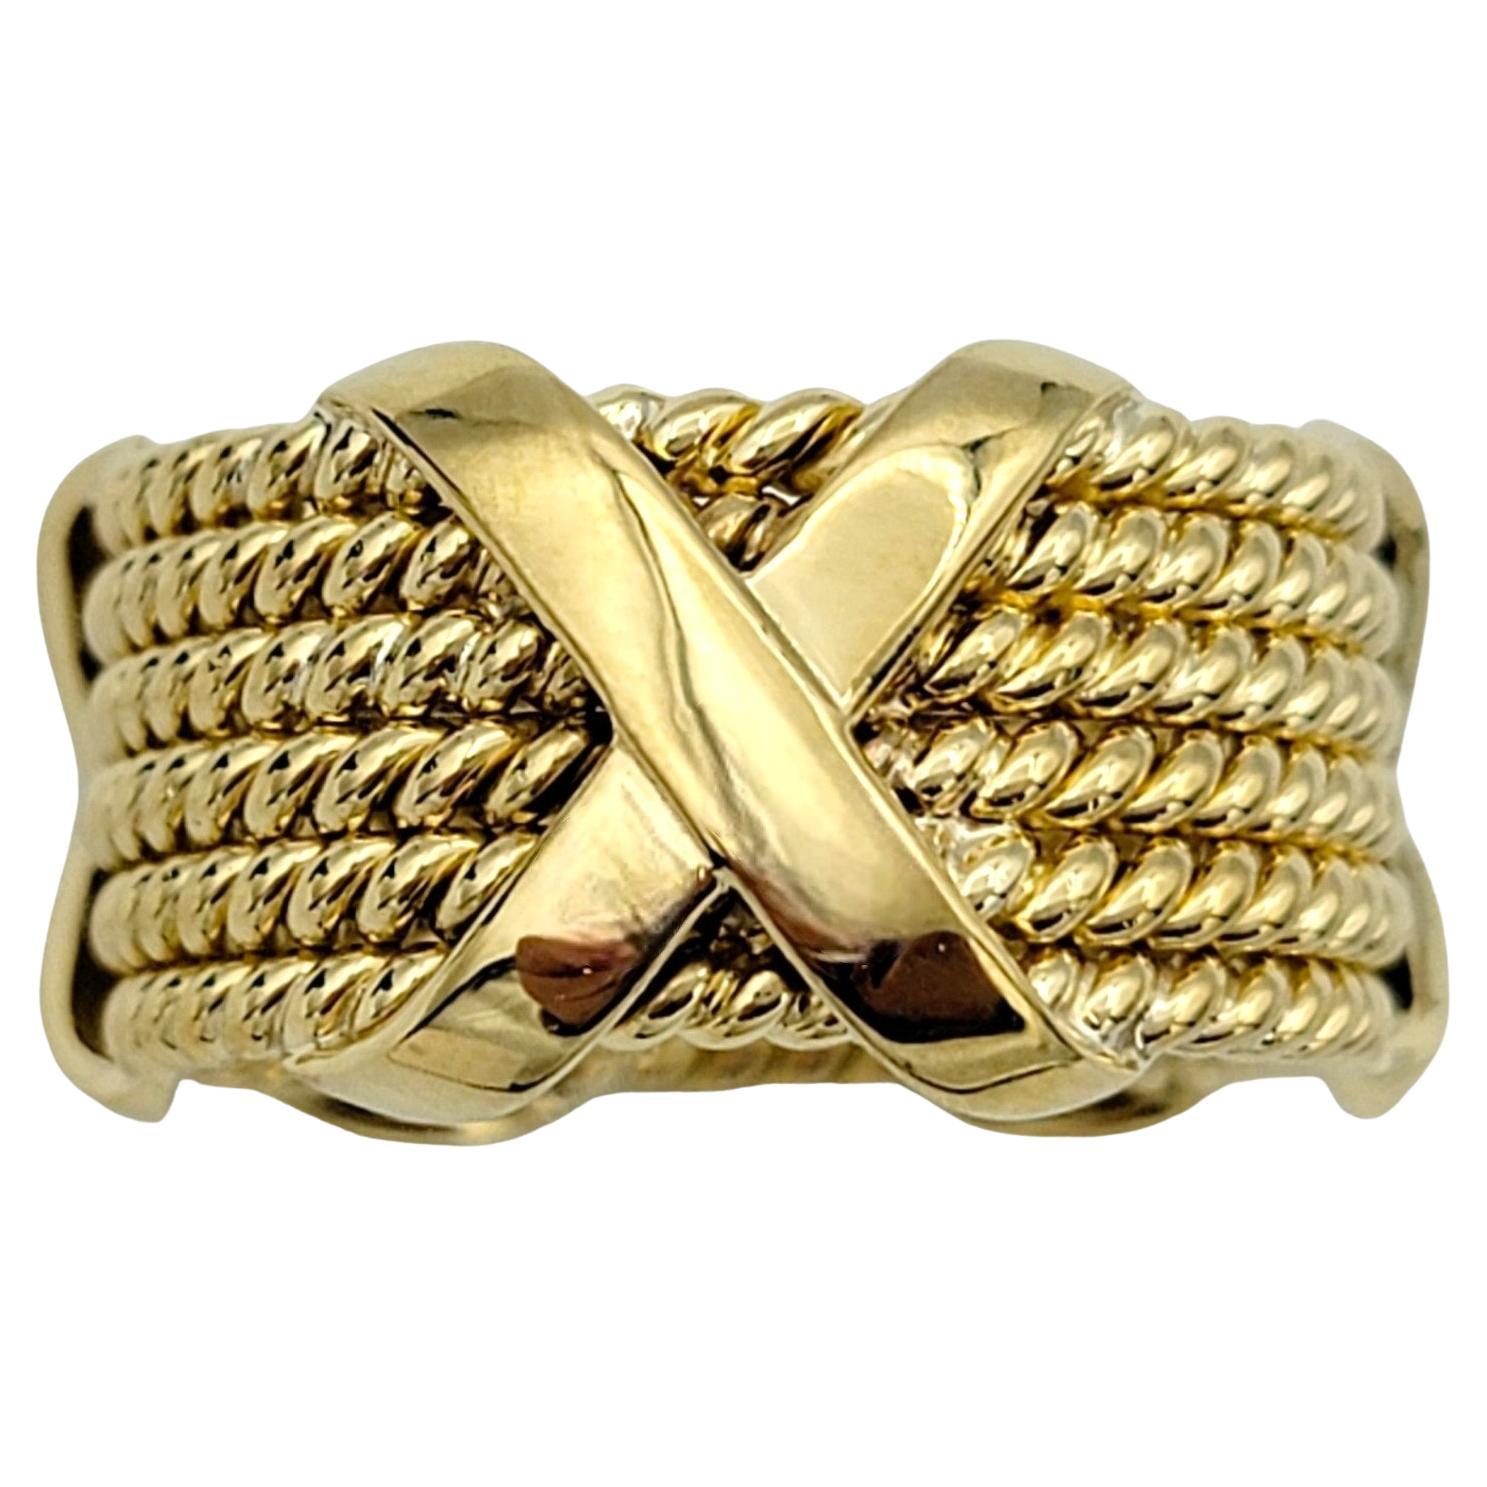 Ring Size: 8.5

Crafted with meticulous attention to detail, the Tiffany & Co. Schlumberger 6-row rope X design band ring exudes sophistication and timeless charm. Fashioned from 18 karat yellow gold, this exquisite ring features six intertwined